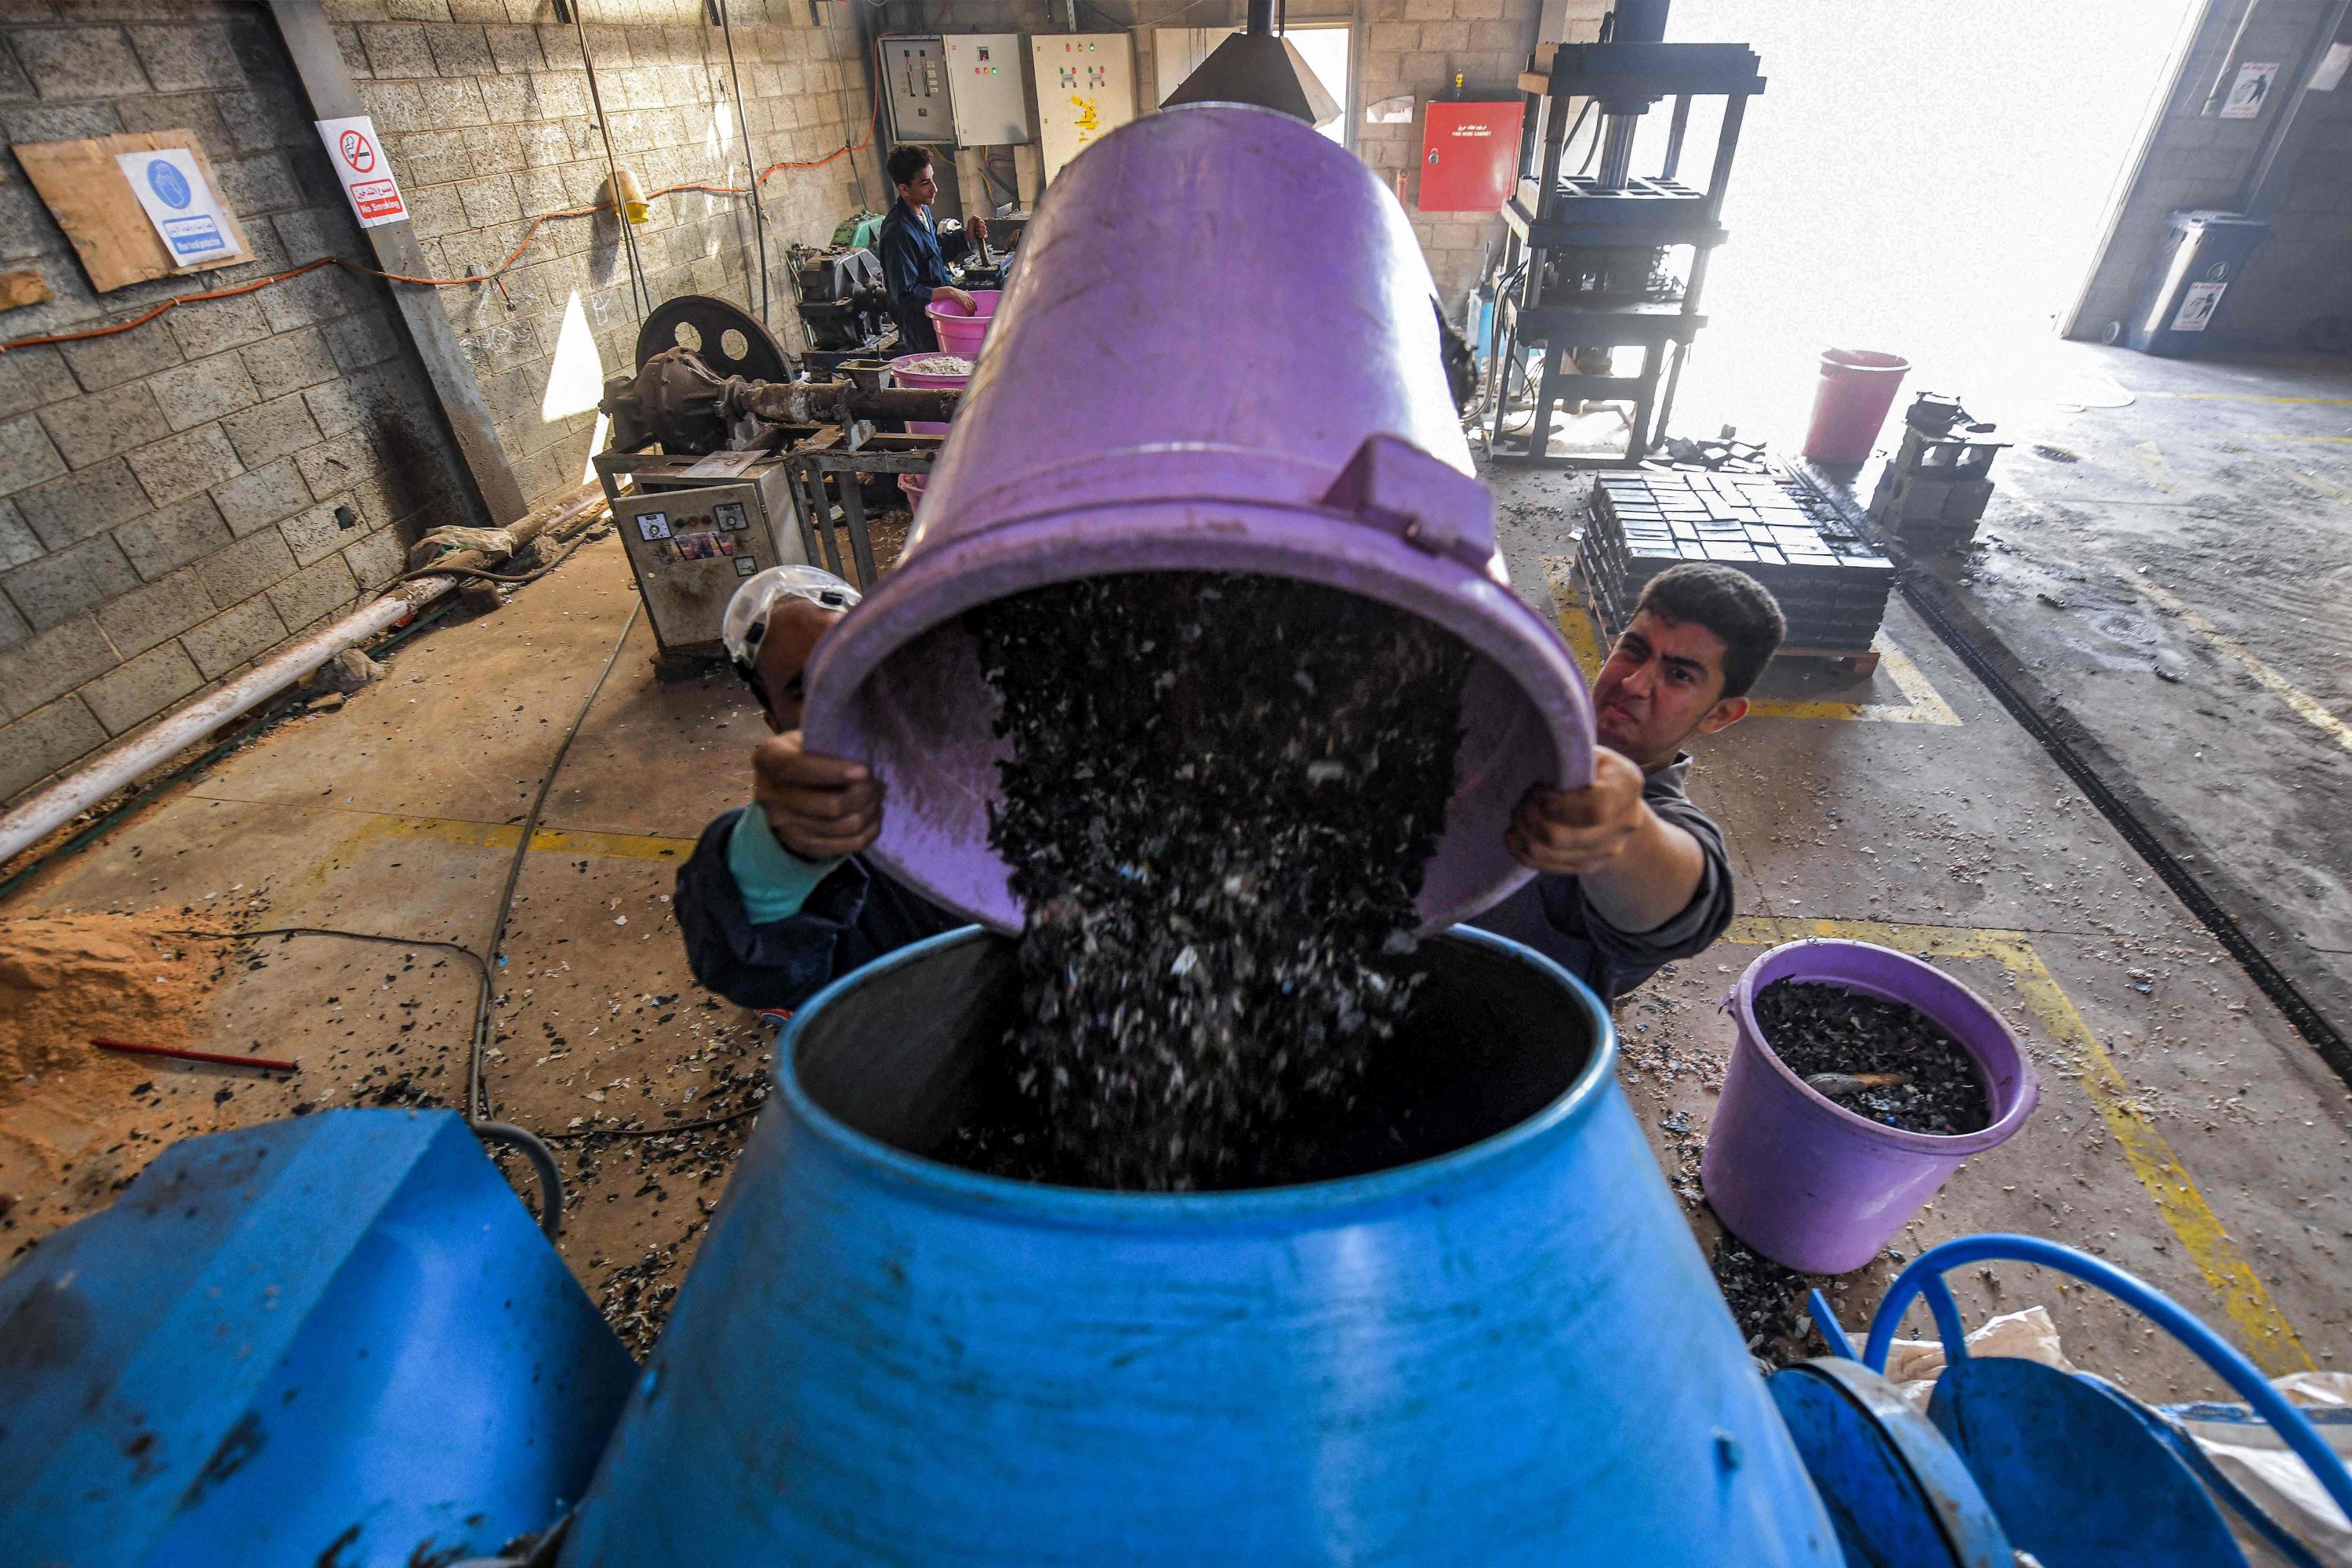 Workers dump plastic waste into a mixer before it is to be recycled into eco-friendly interlocking tiles used in outdoor walkways at a workshop of the startup company 